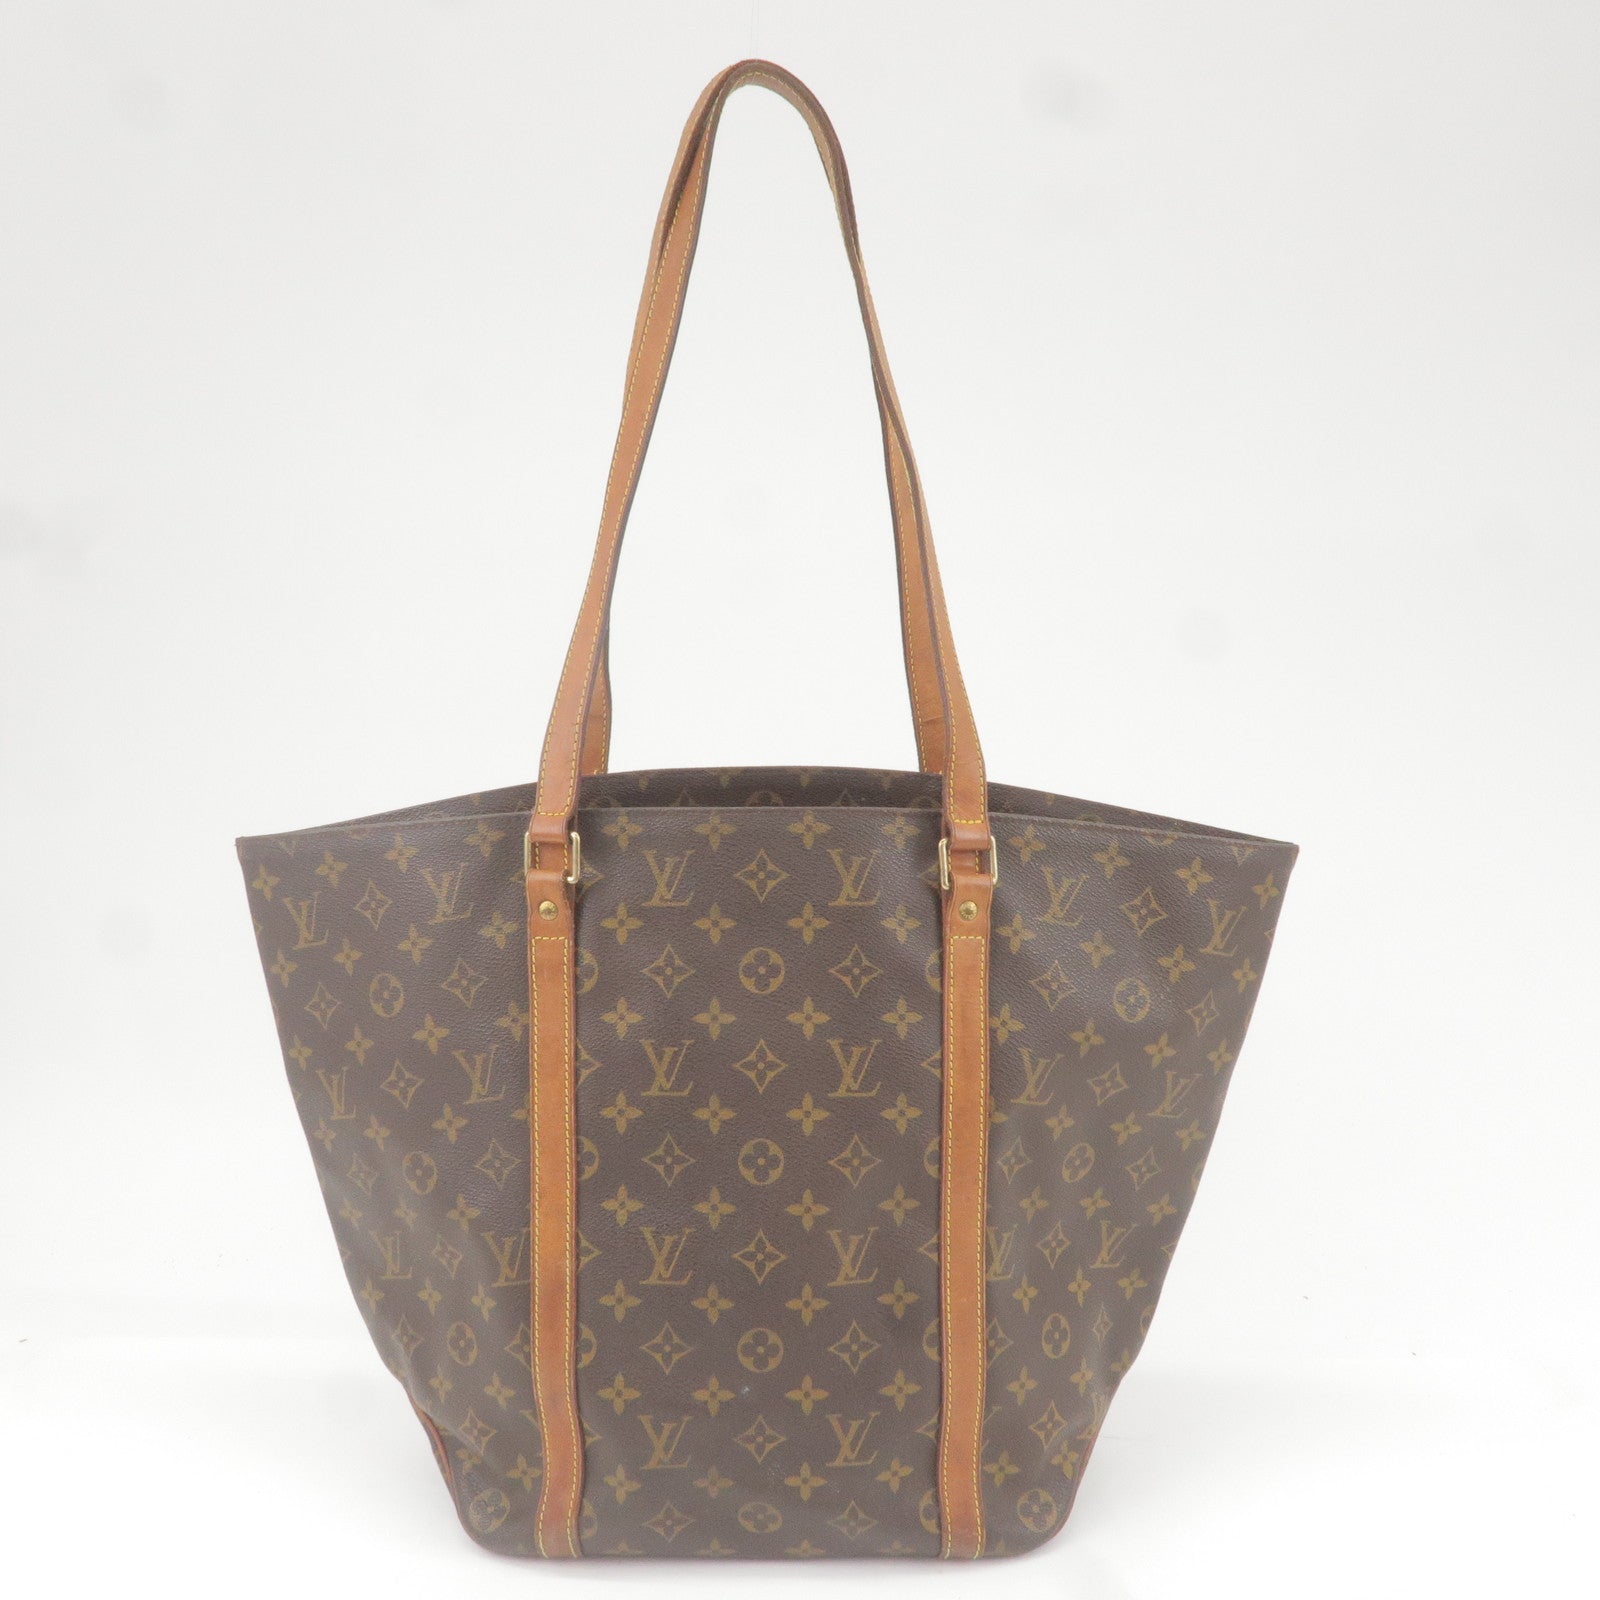 Which neverfull should i get for uni? : r/Louisvuitton